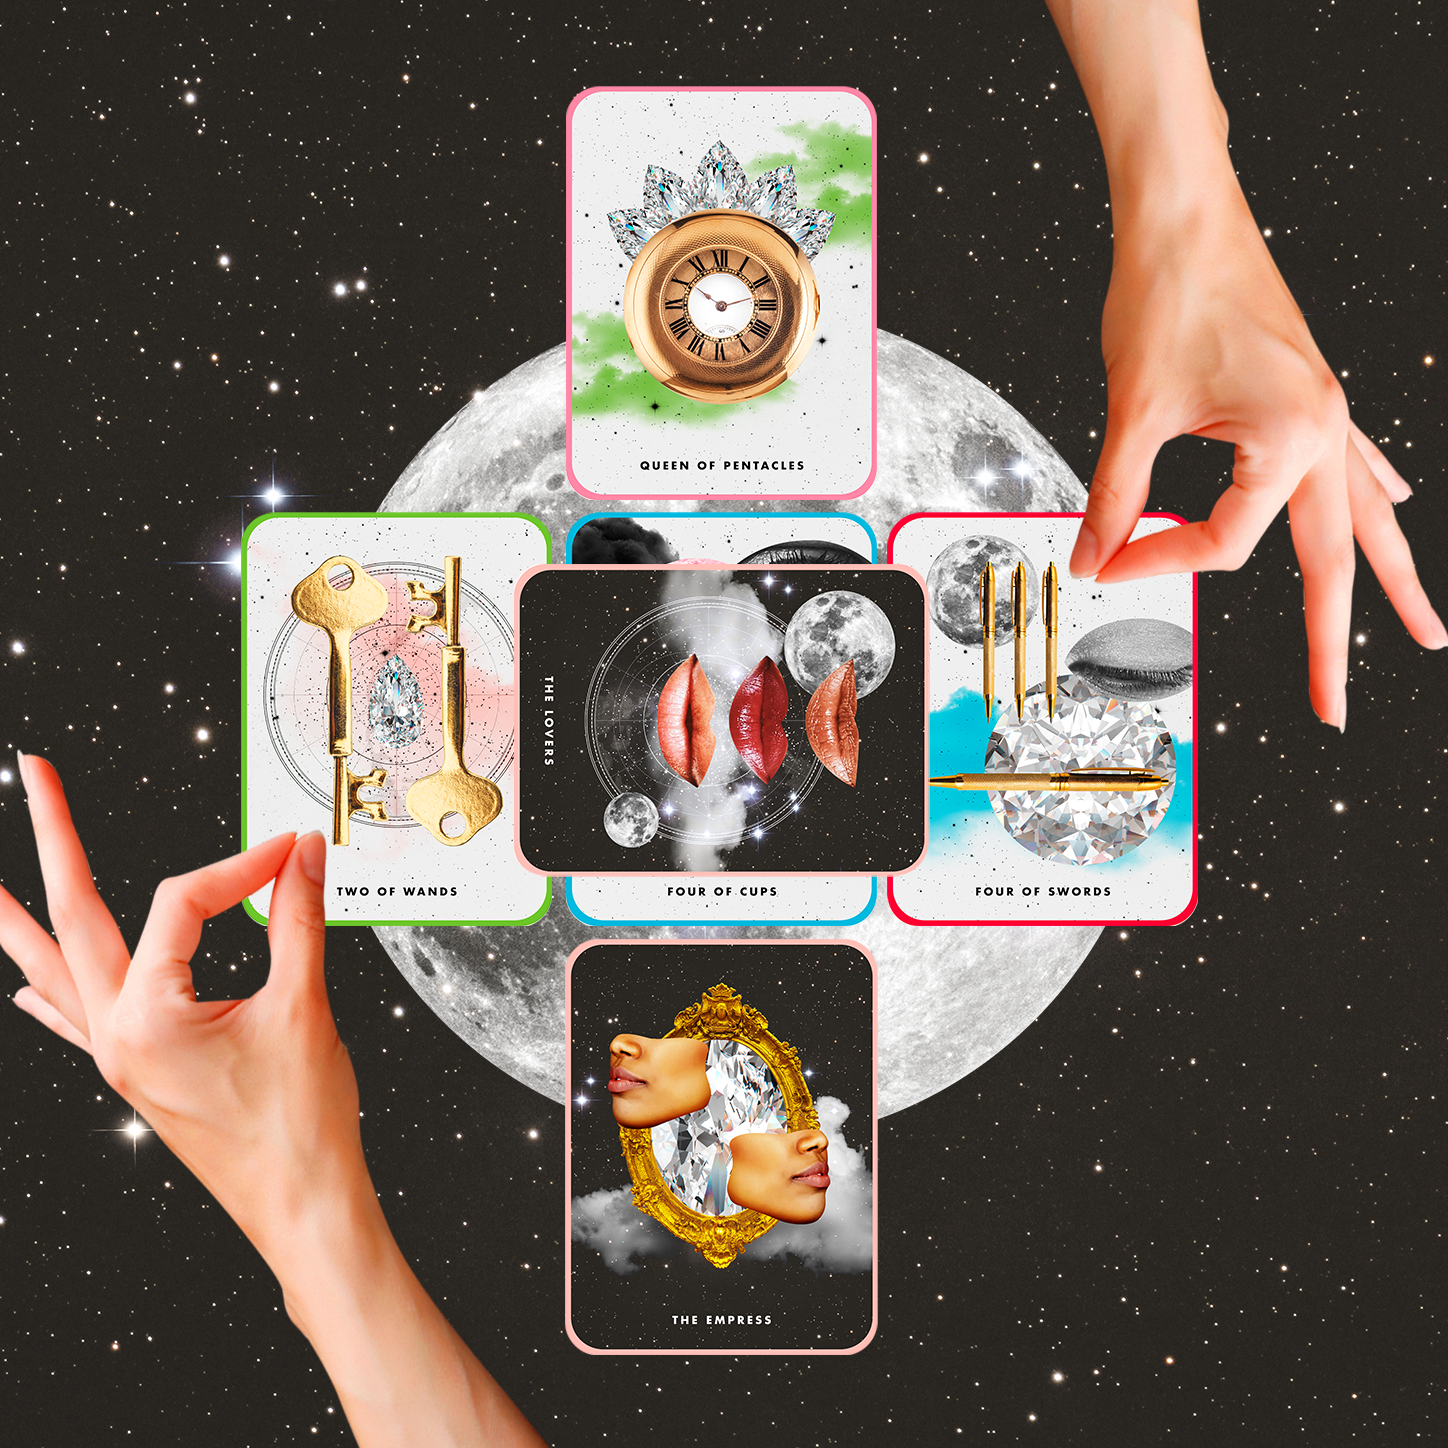 Your Weekly Tarot Card Reading Wants You to Hold Off on That Plan